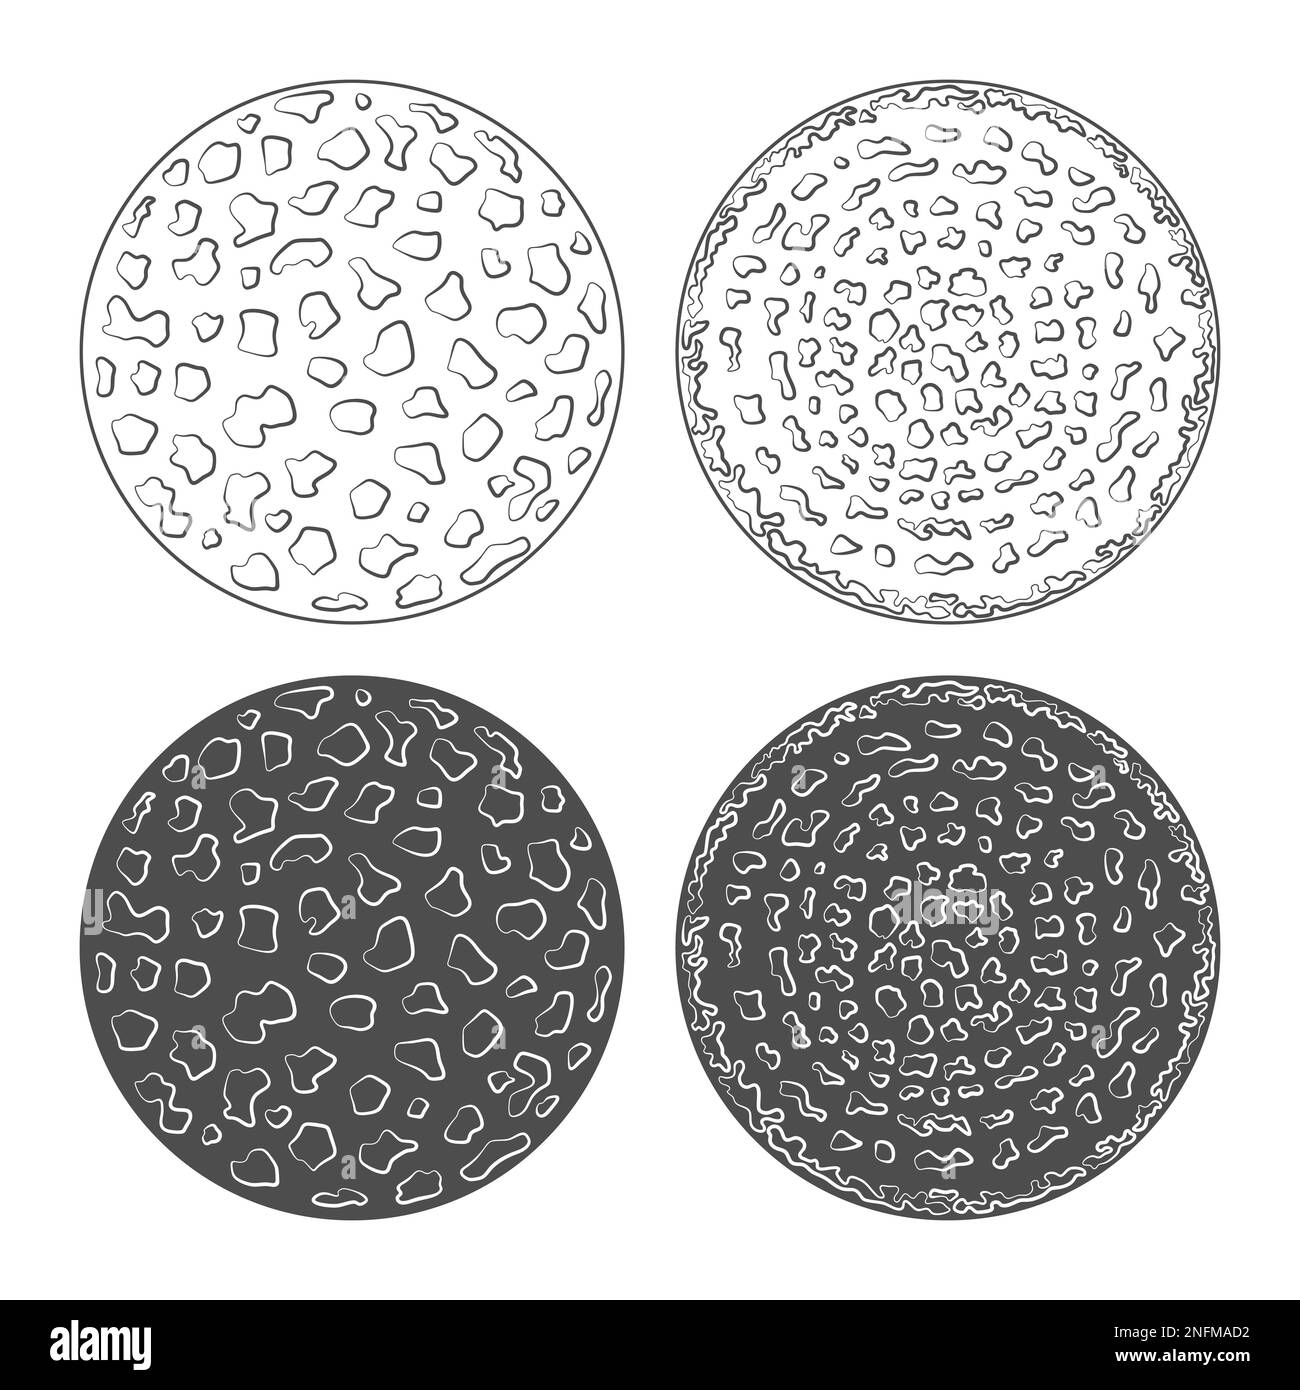 Set of black and white illustration with fly agaric mushroom caps. Isolated vector objects on white background. Stock Vector